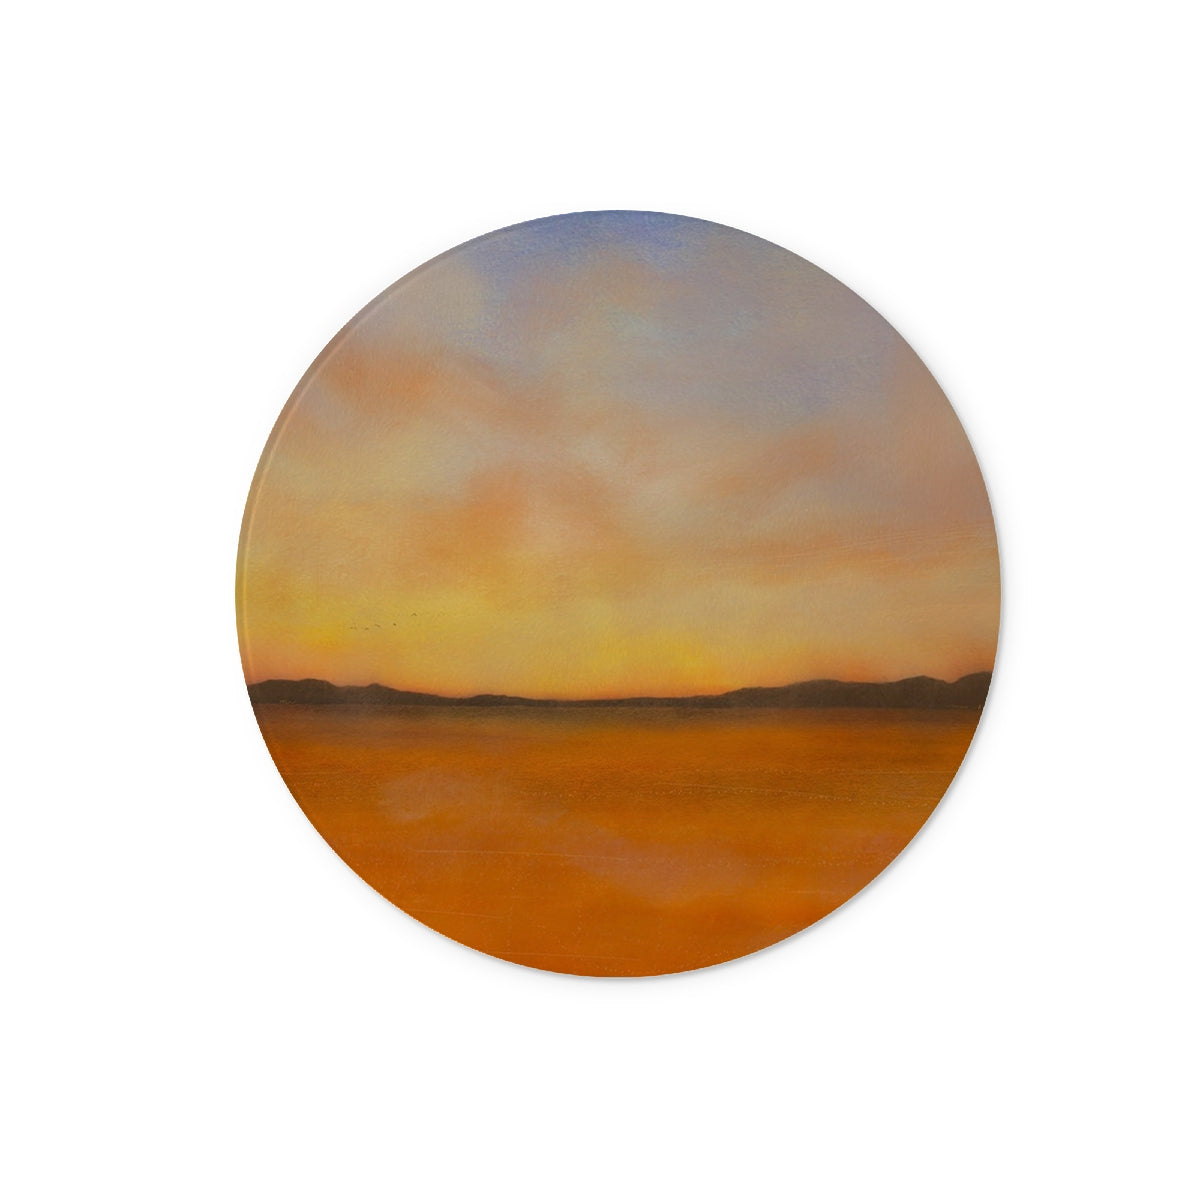 Islay Dawn Art Gifts Glass Chopping Board-Glass Chopping Boards-Hebridean Islands Art Gallery-12" Round-Paintings, Prints, Homeware, Art Gifts From Scotland By Scottish Artist Kevin Hunter